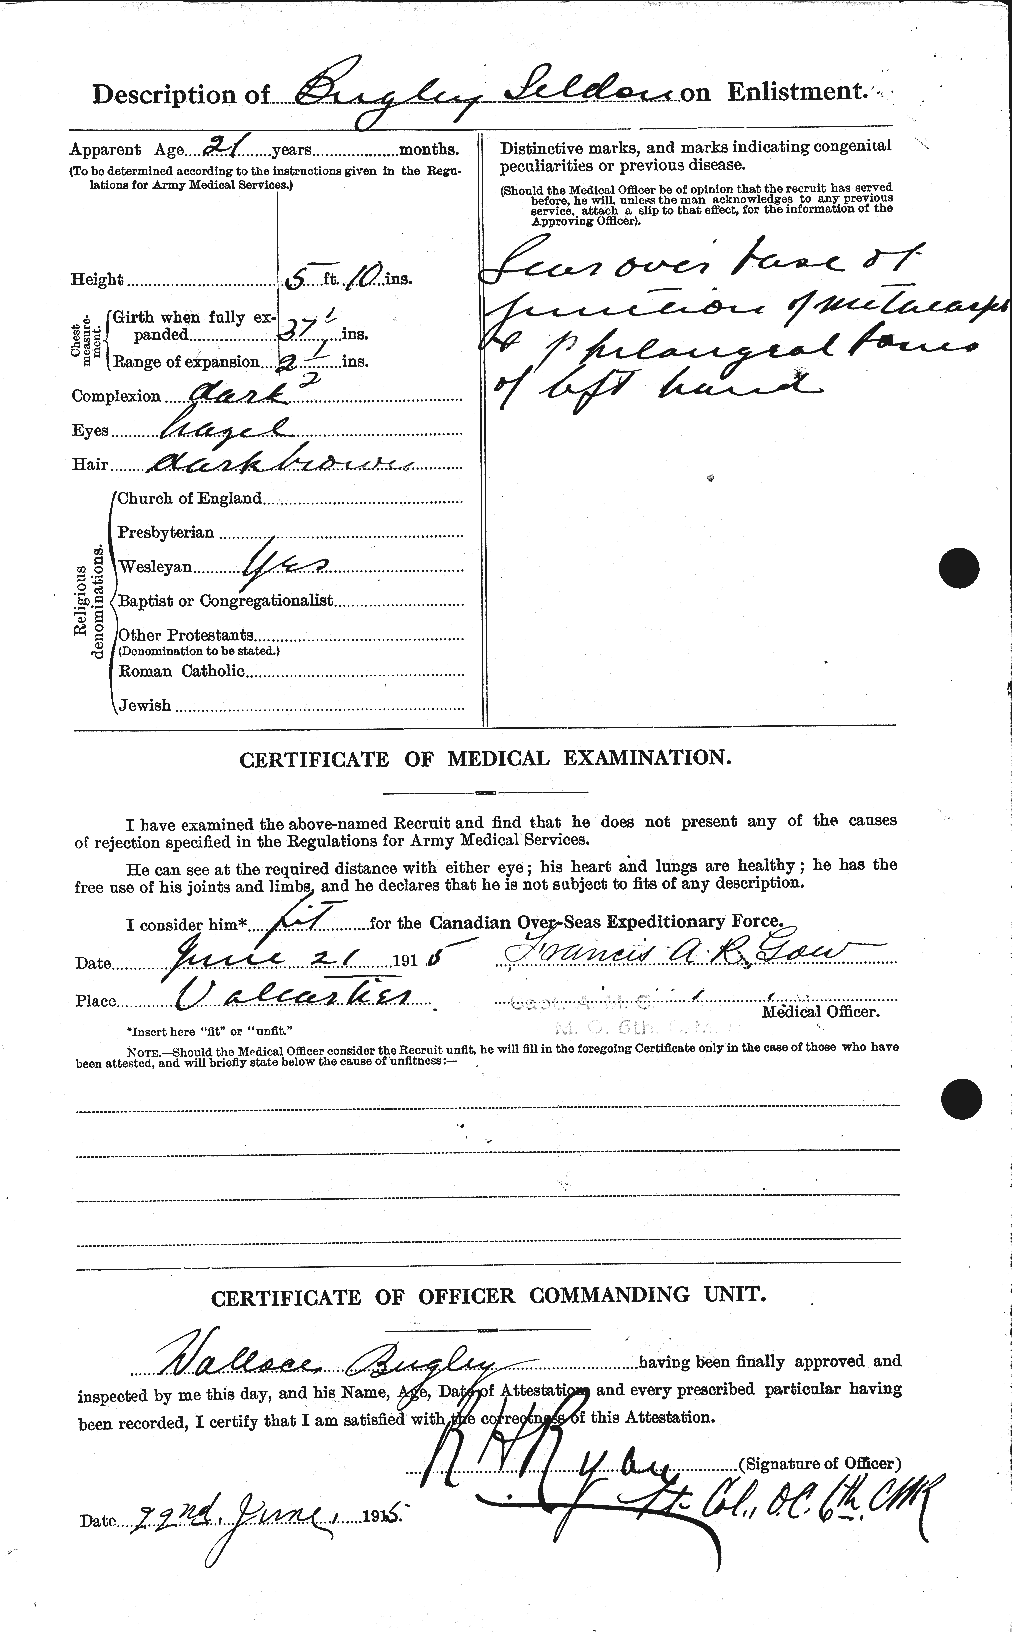 Personnel Records of the First World War - CEF 270532b